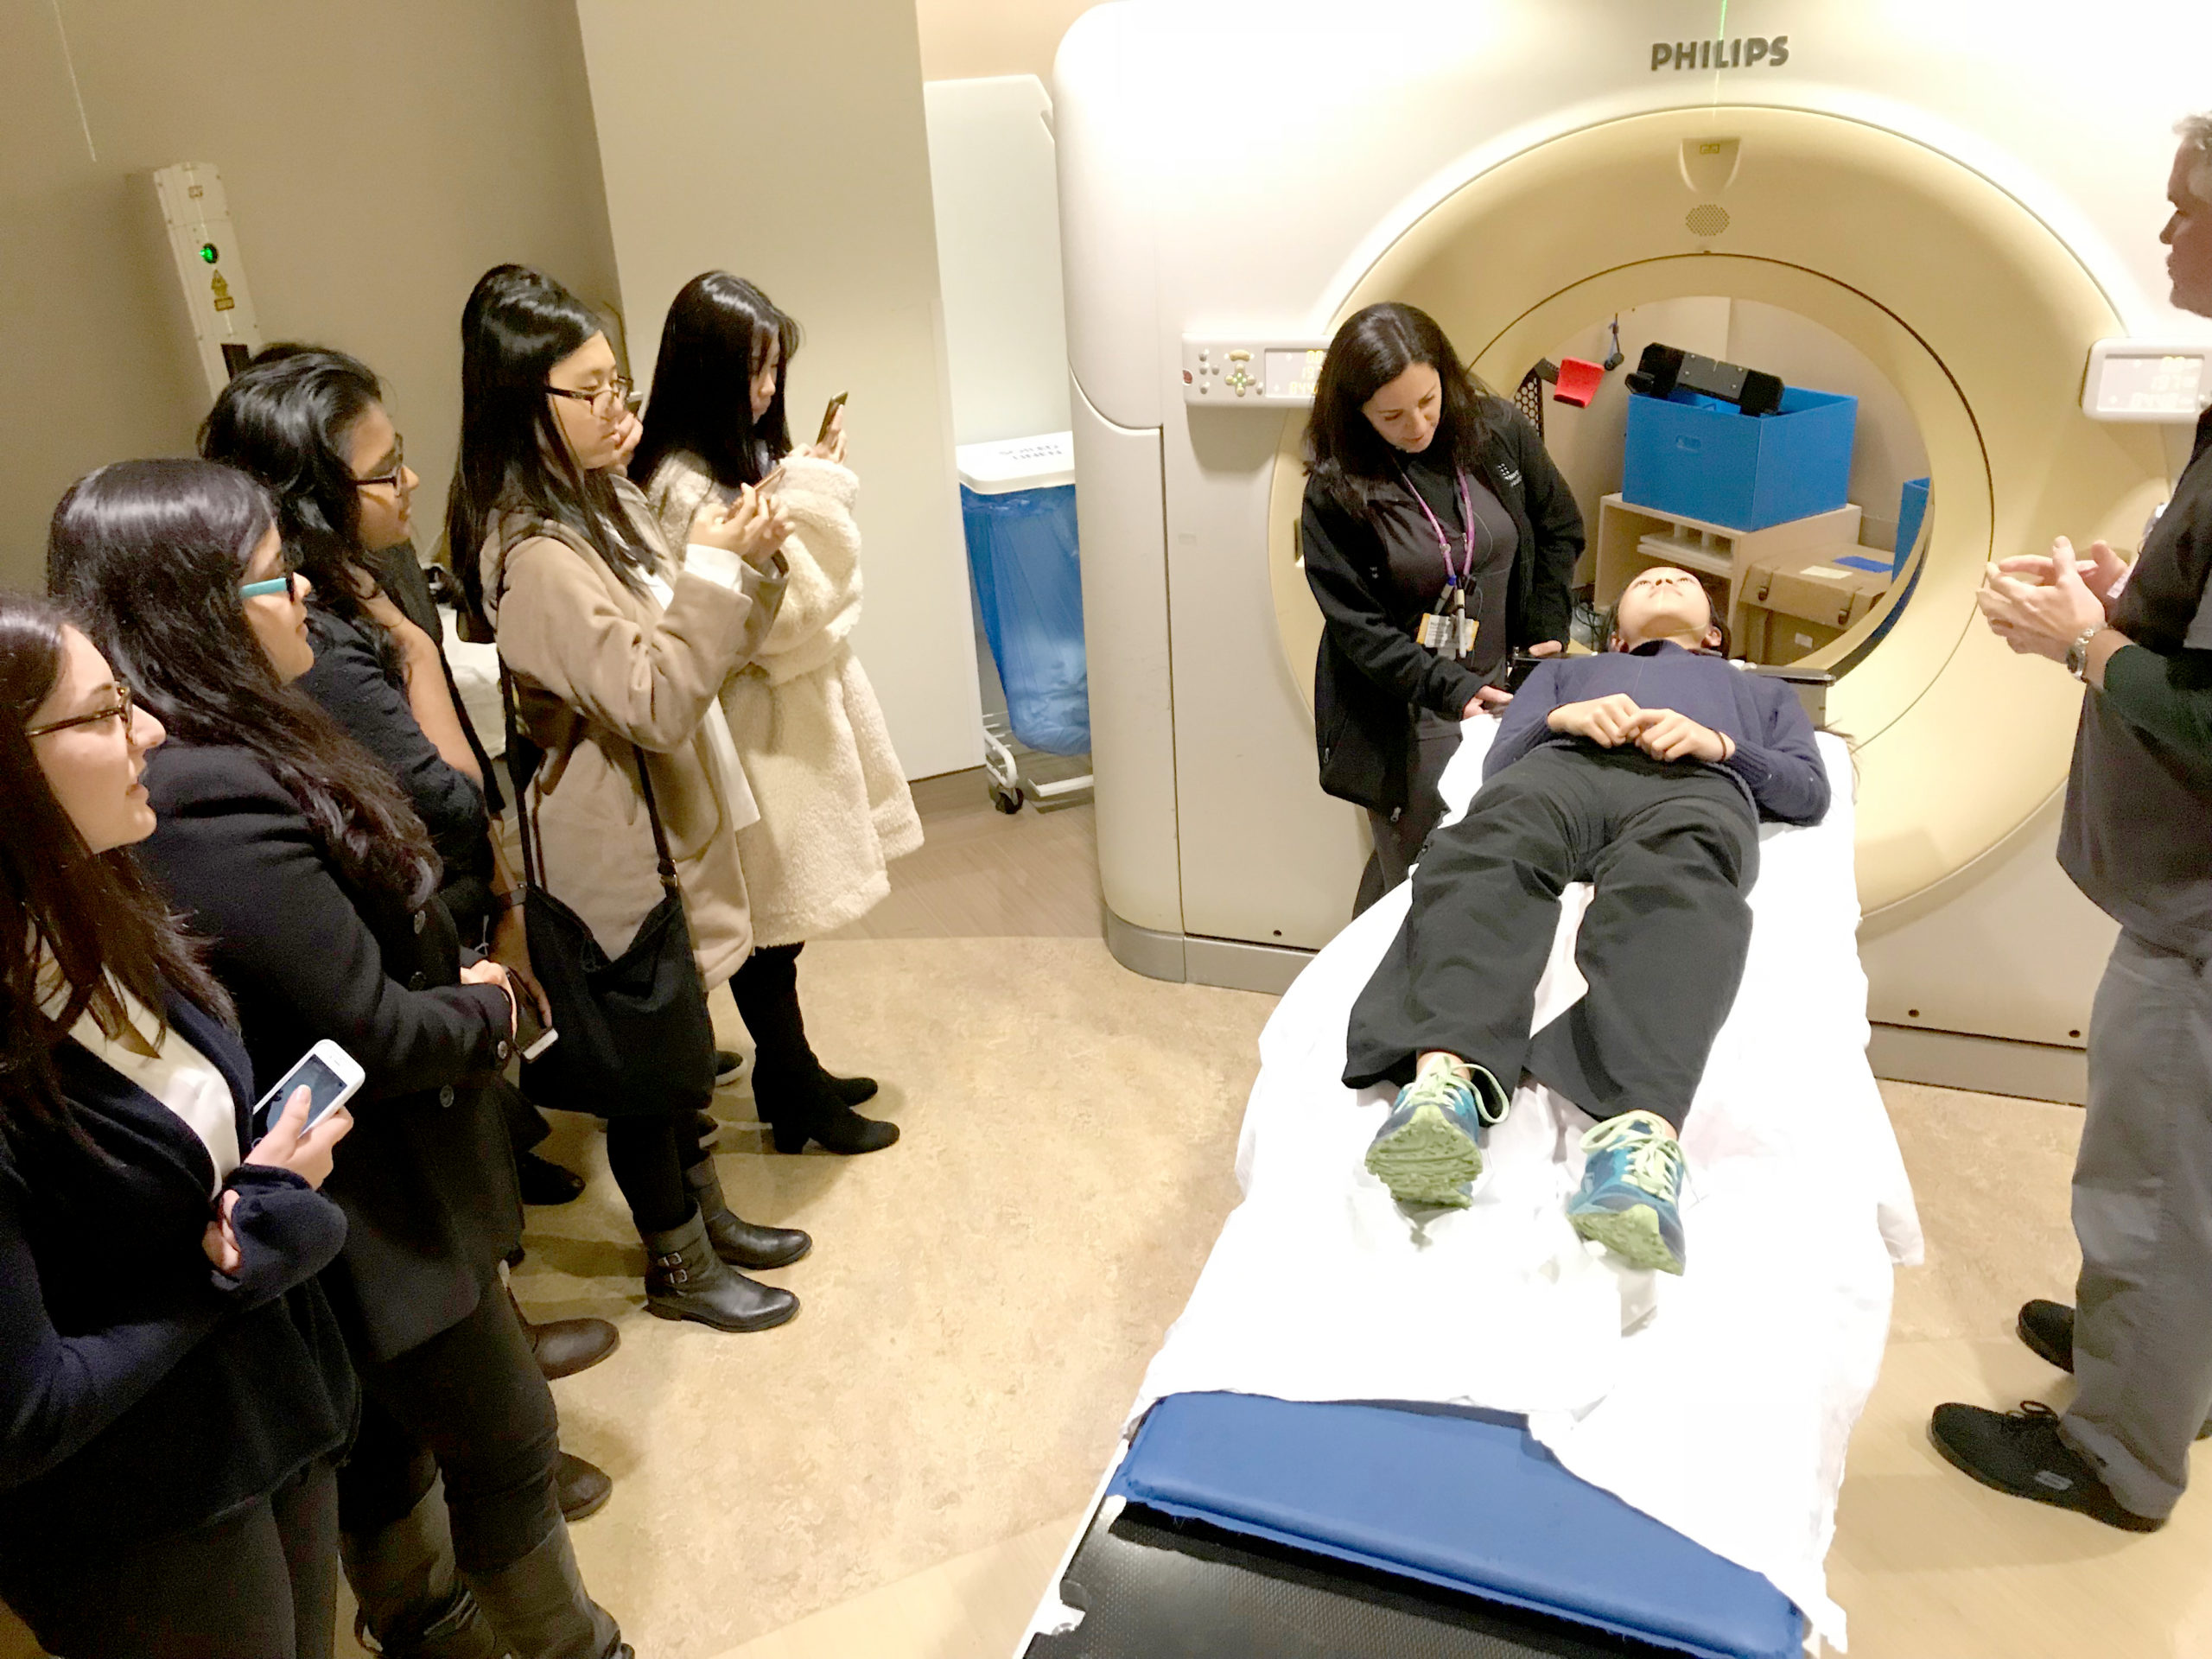 During a visit to the Northwell Health Radiology Department at LIJ, South High students learned how CT machines are used to create patient images and treatment plans. (Photo courtesy of the Great Neck Public Schools)